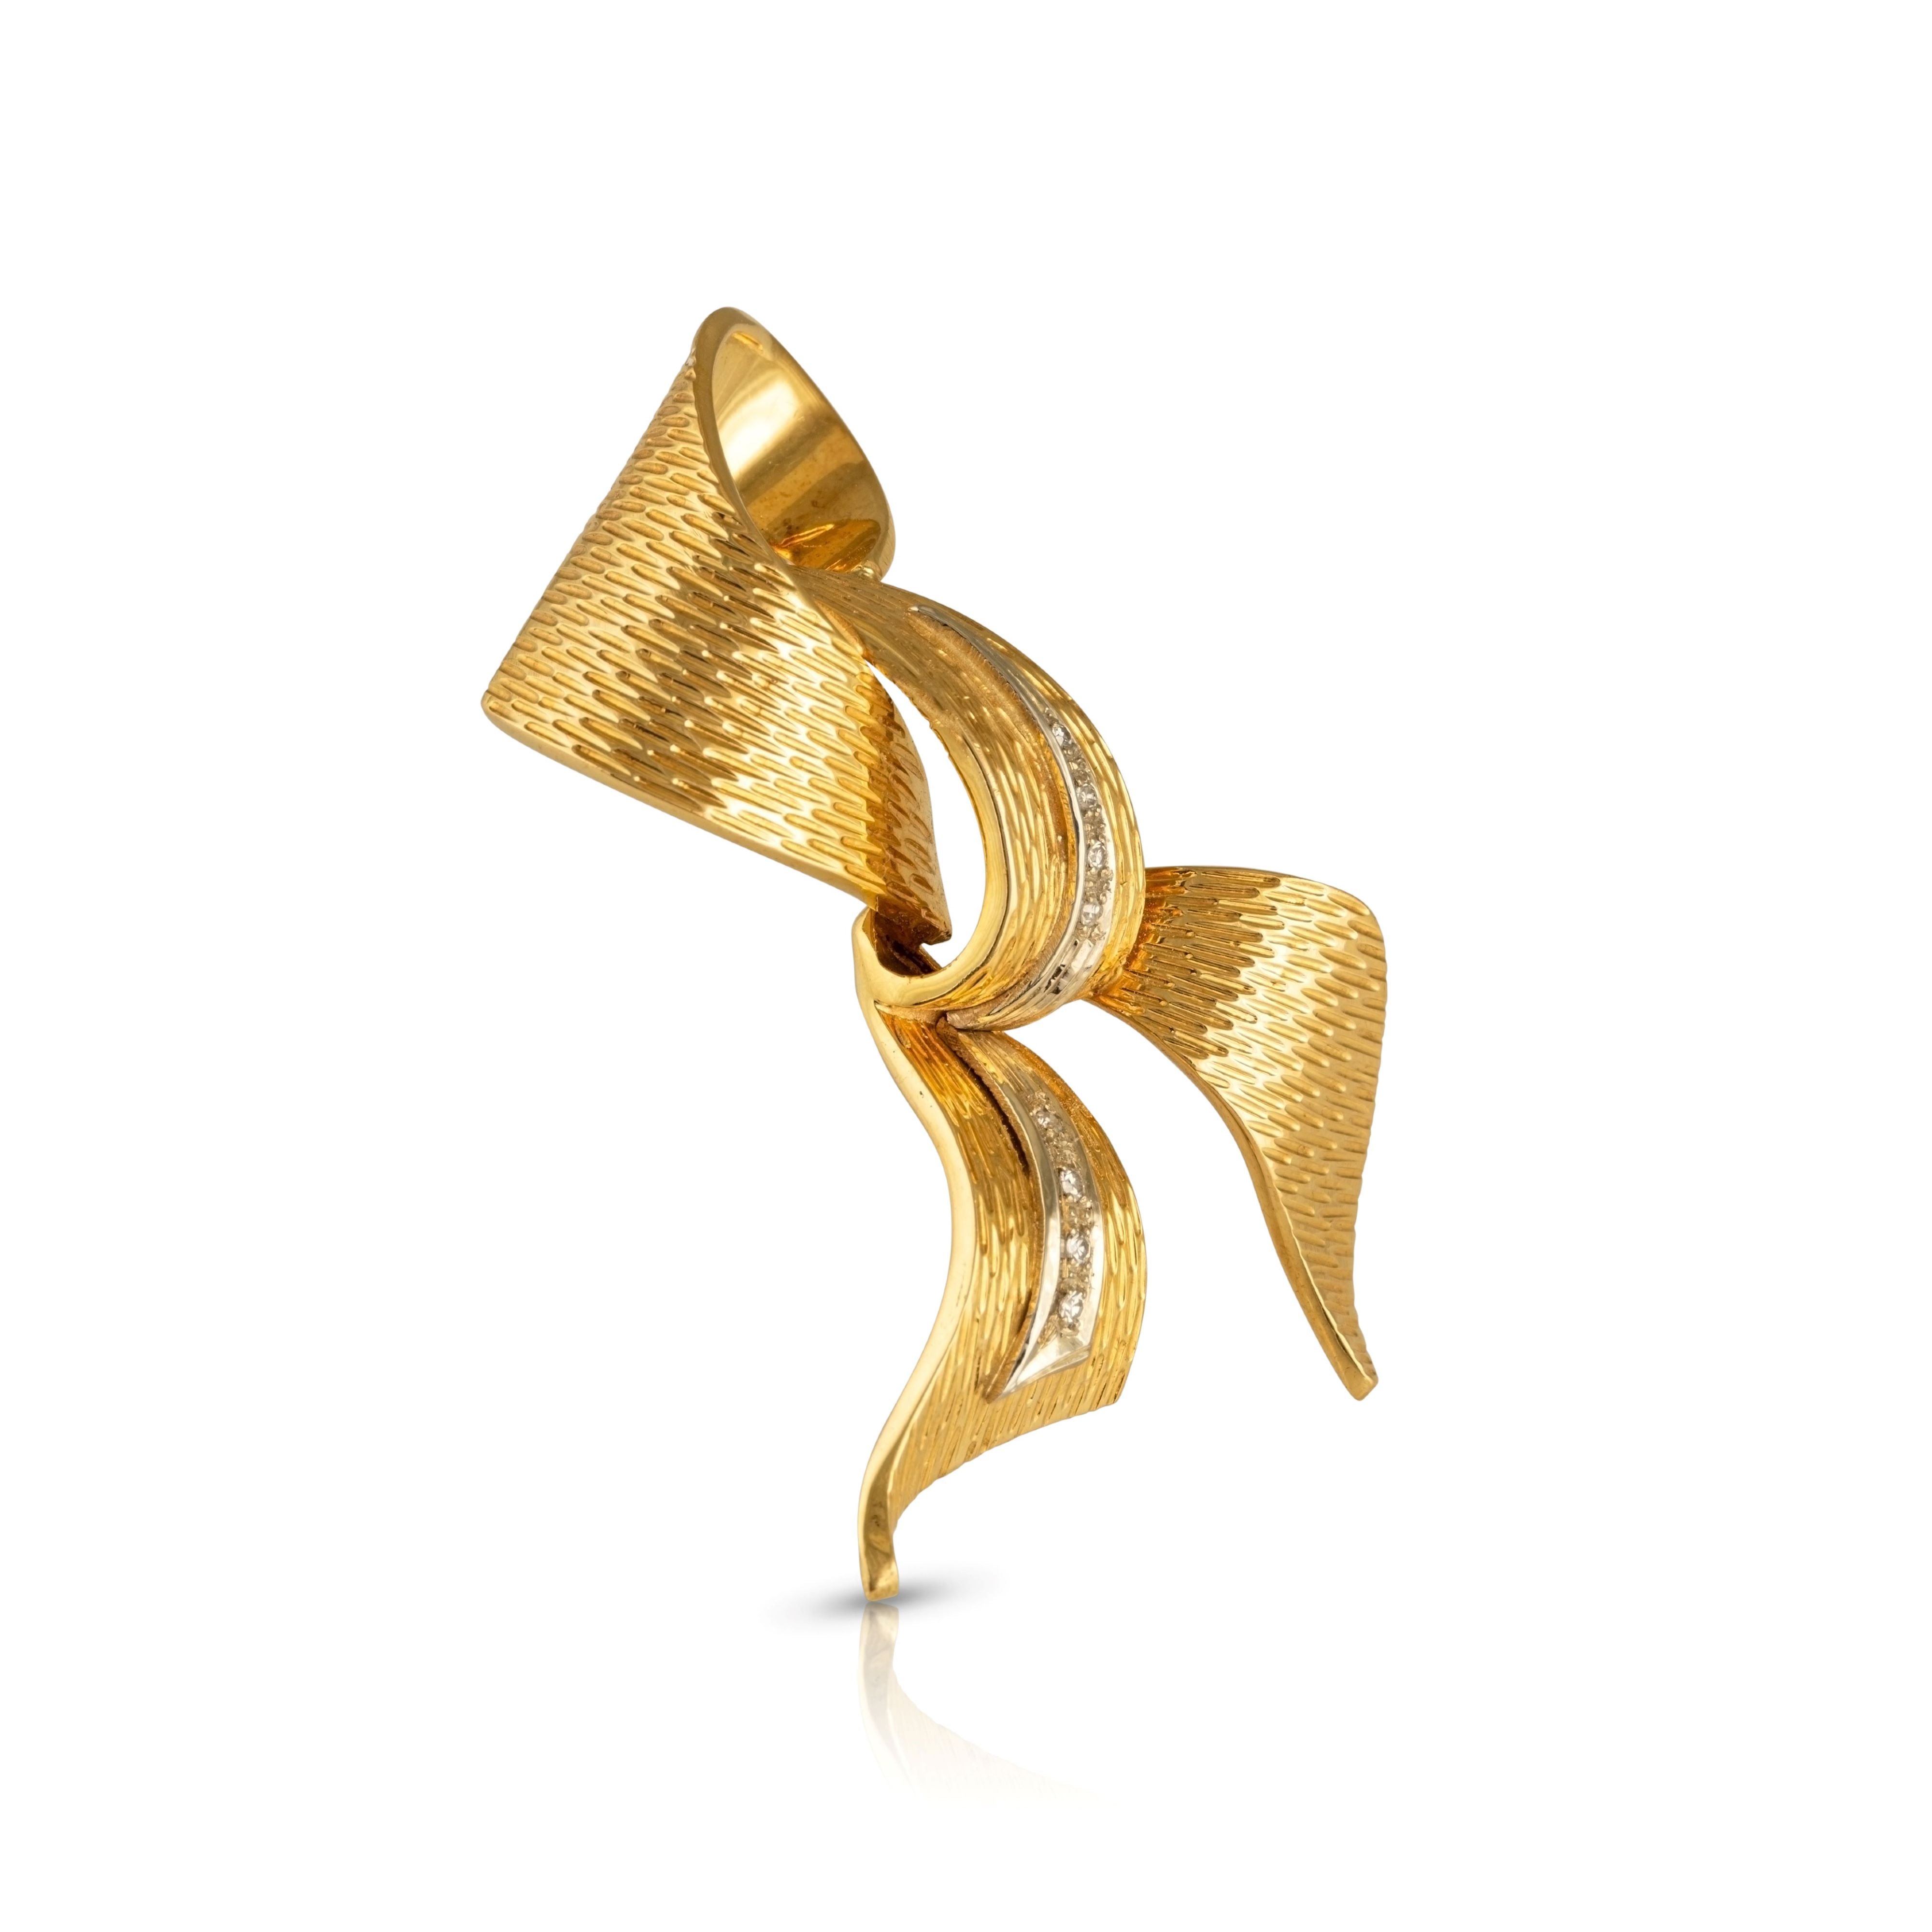 Tilted view of 1960s gold and diamond brooch